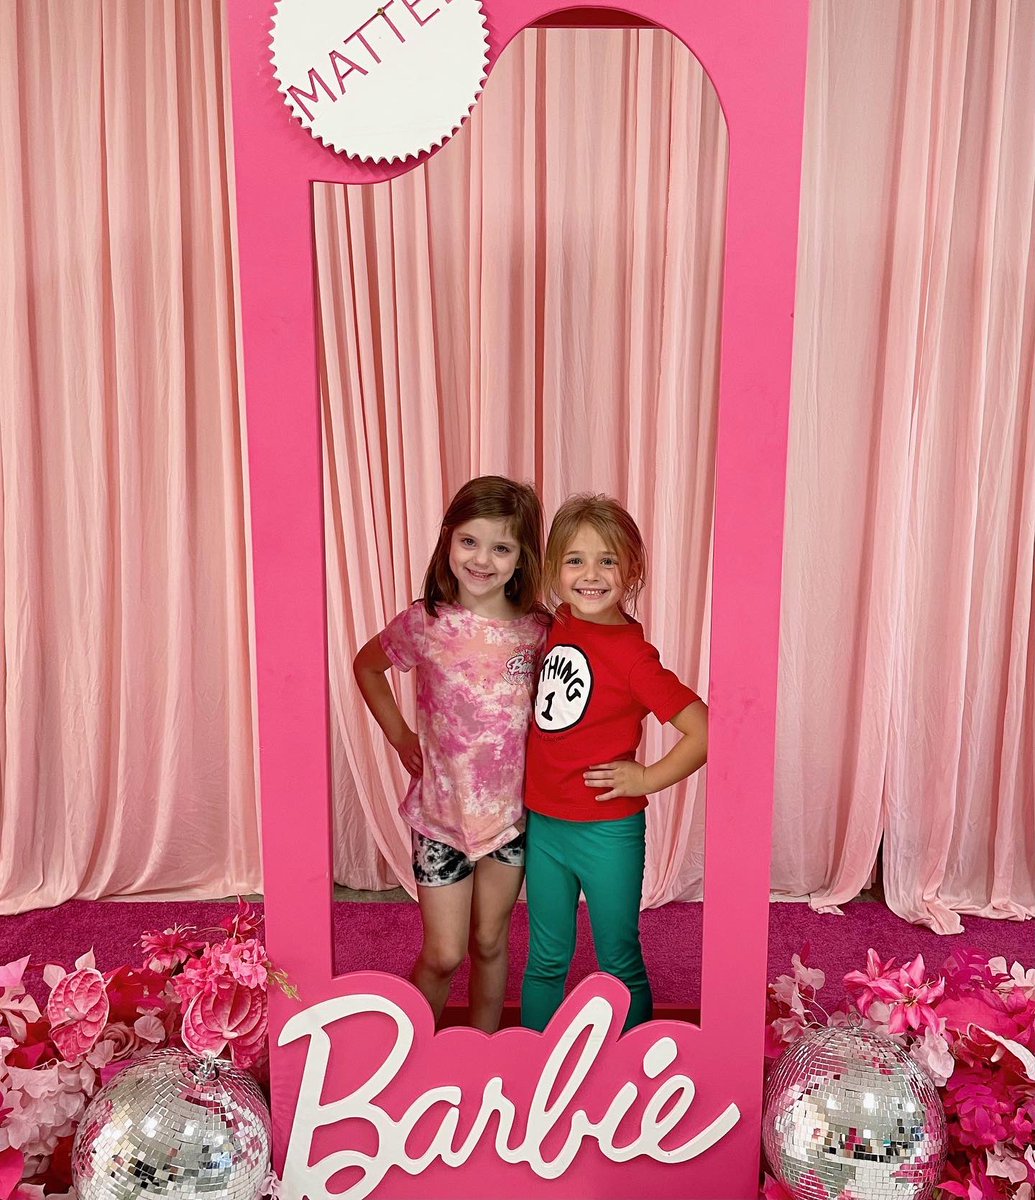 Barbie & Ken Day—there was SO much pink & SO much fun today!💕

Let’s keep this positive energy rolling into the rest of the week, Warriors!

Thank you to @rochadesignsllc for the fun backdrop & Barbie box!

#weareschuyler #SCHS #schuylerwarriors #hoco23